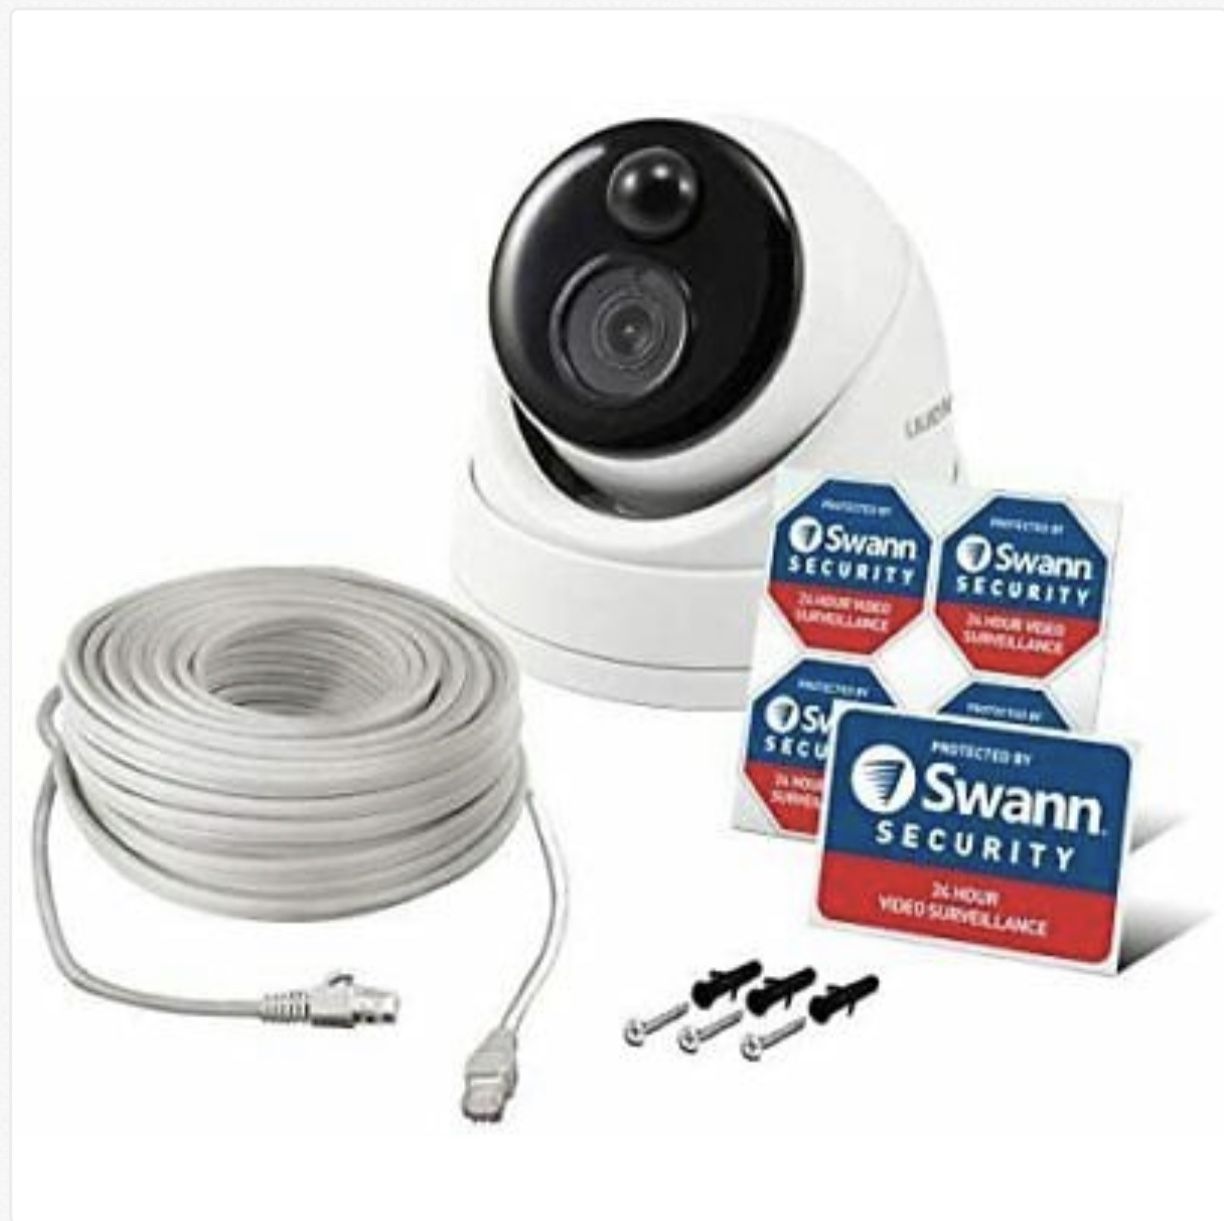 Swann SWNHD-888MSD add on security camera ......6 available $50 each